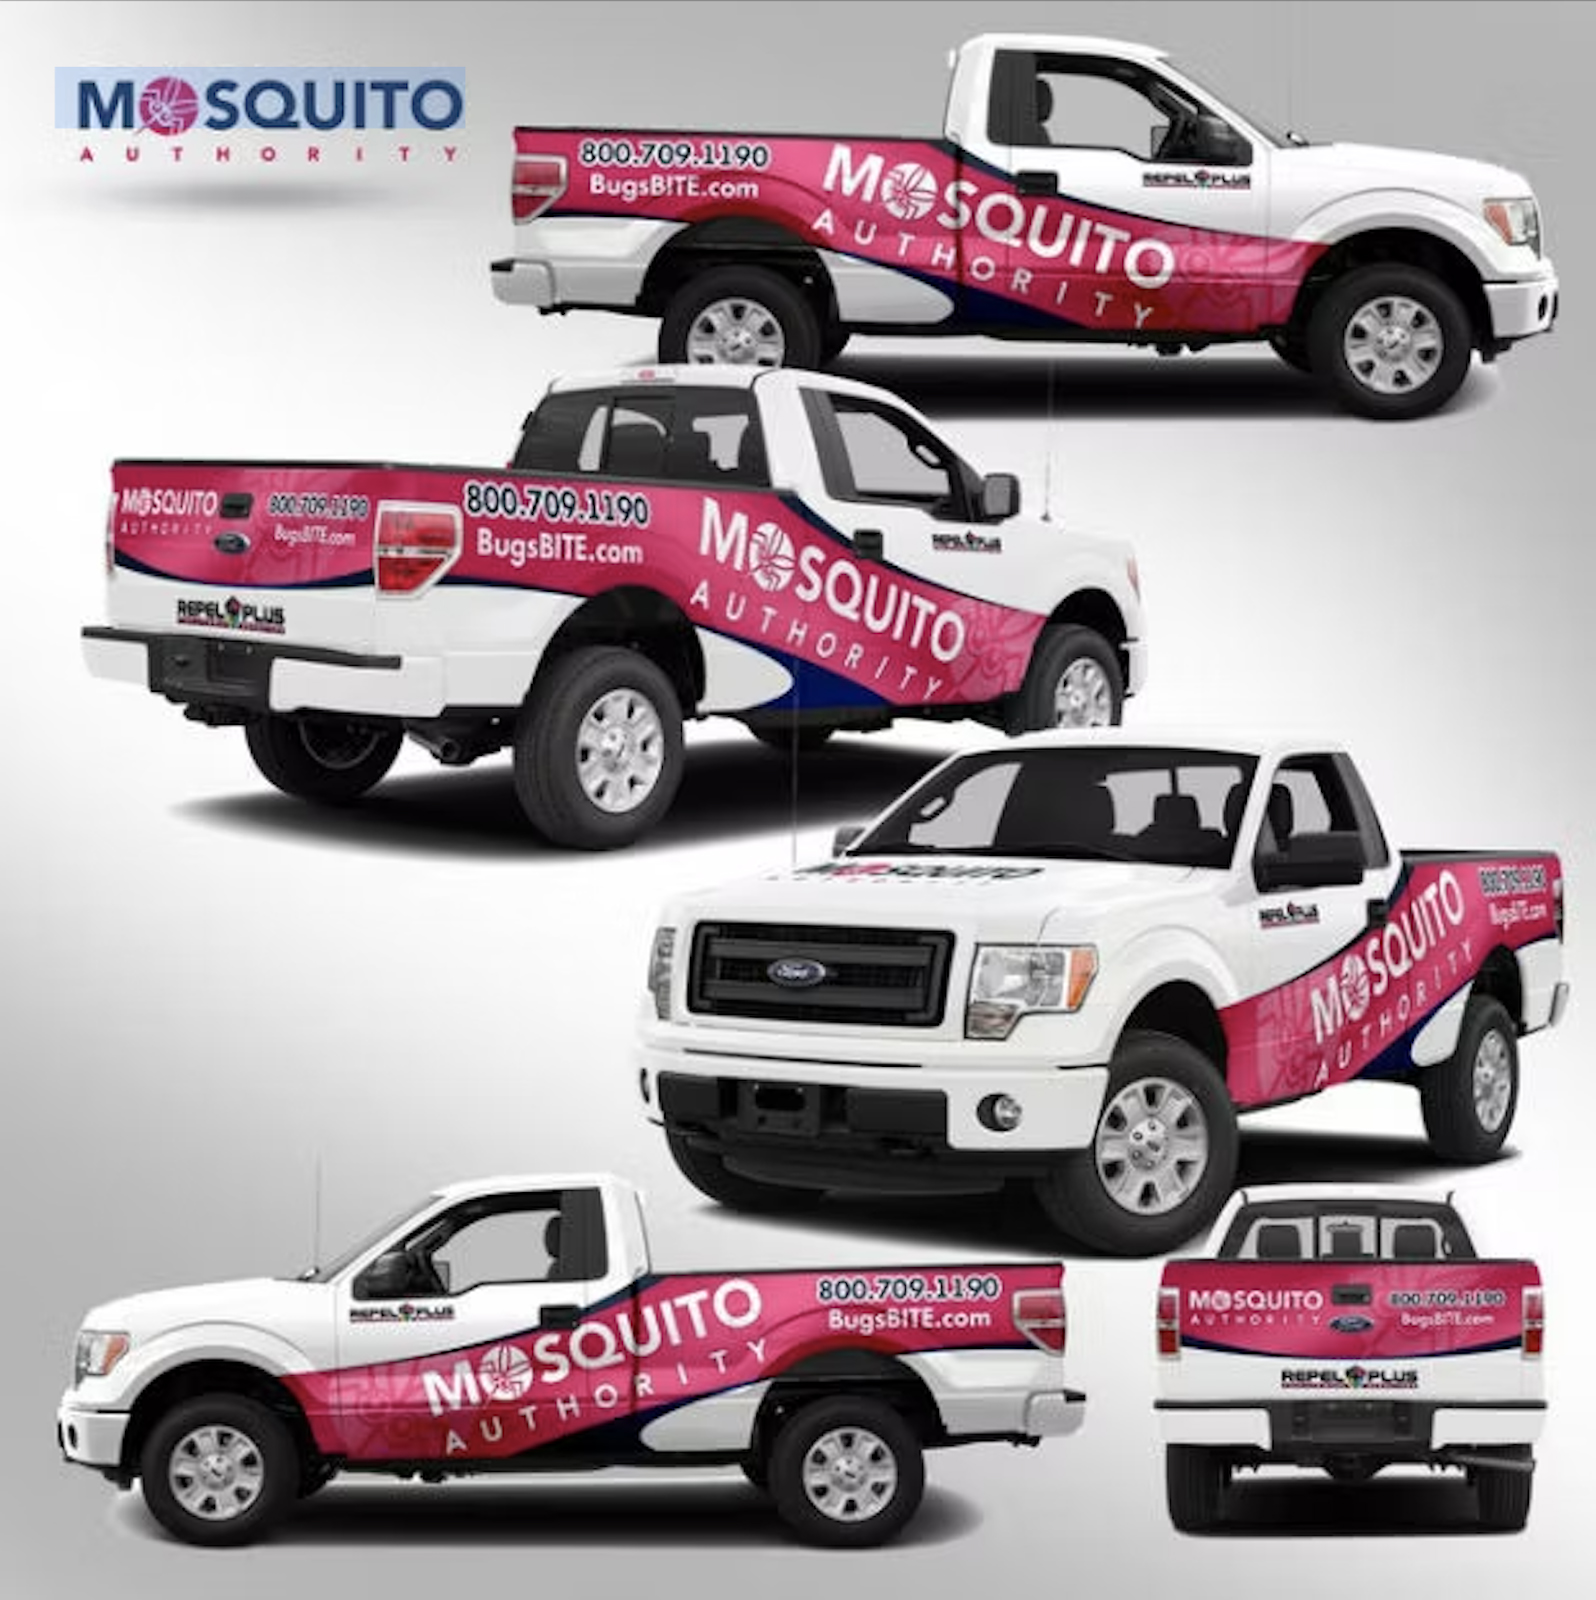 An example of a truck wrap for a mosquito abatement company.